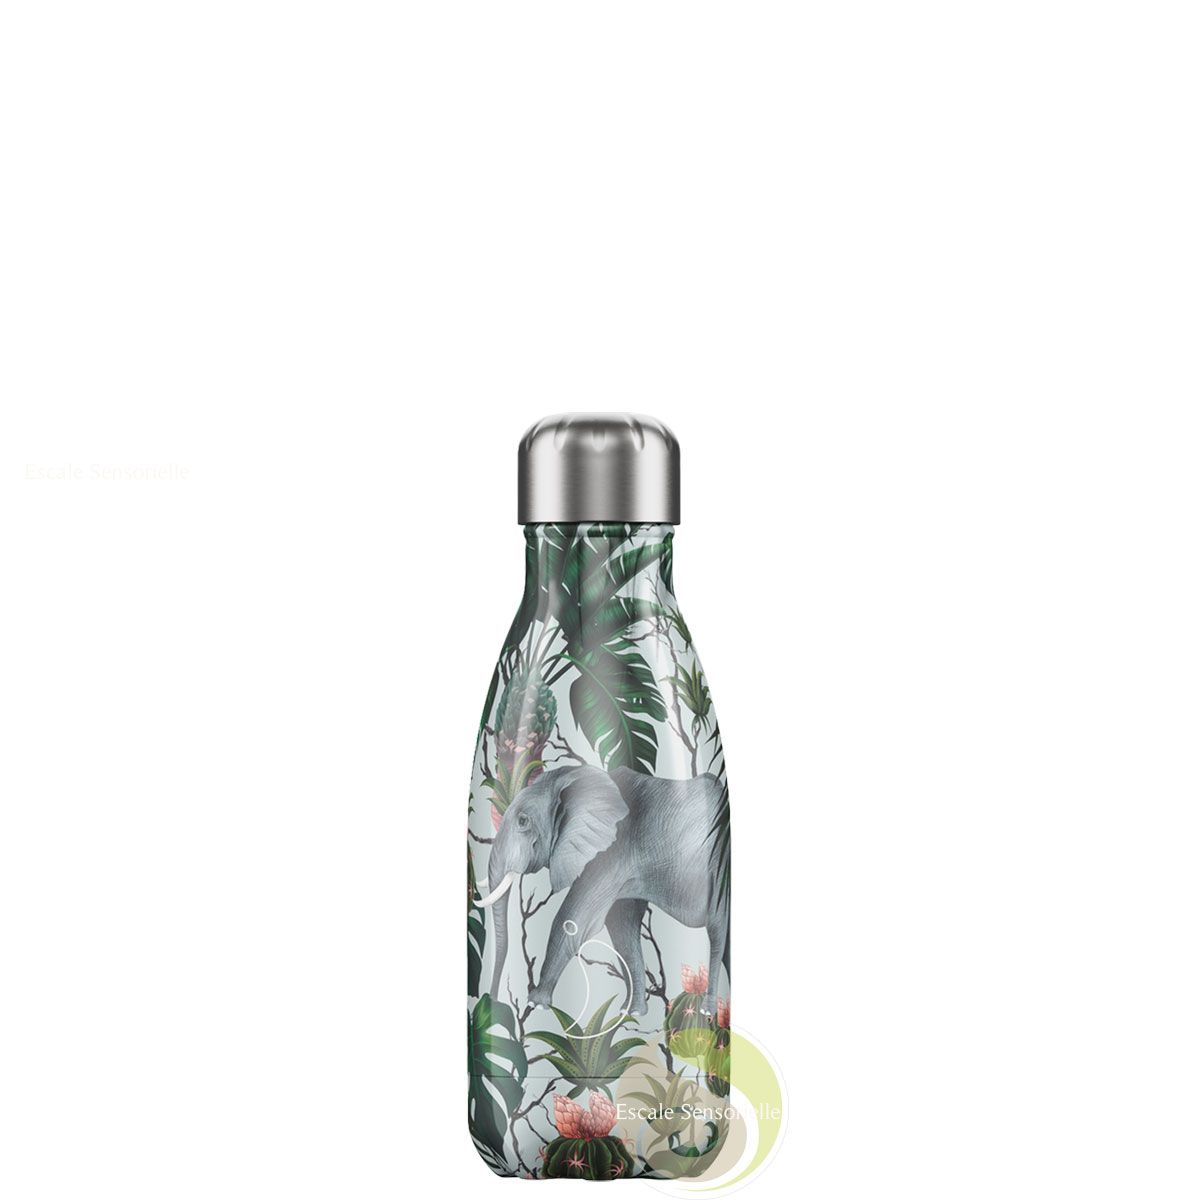 Matt Store Is - Nouveau : Gourde isotherme Chilly's bottle